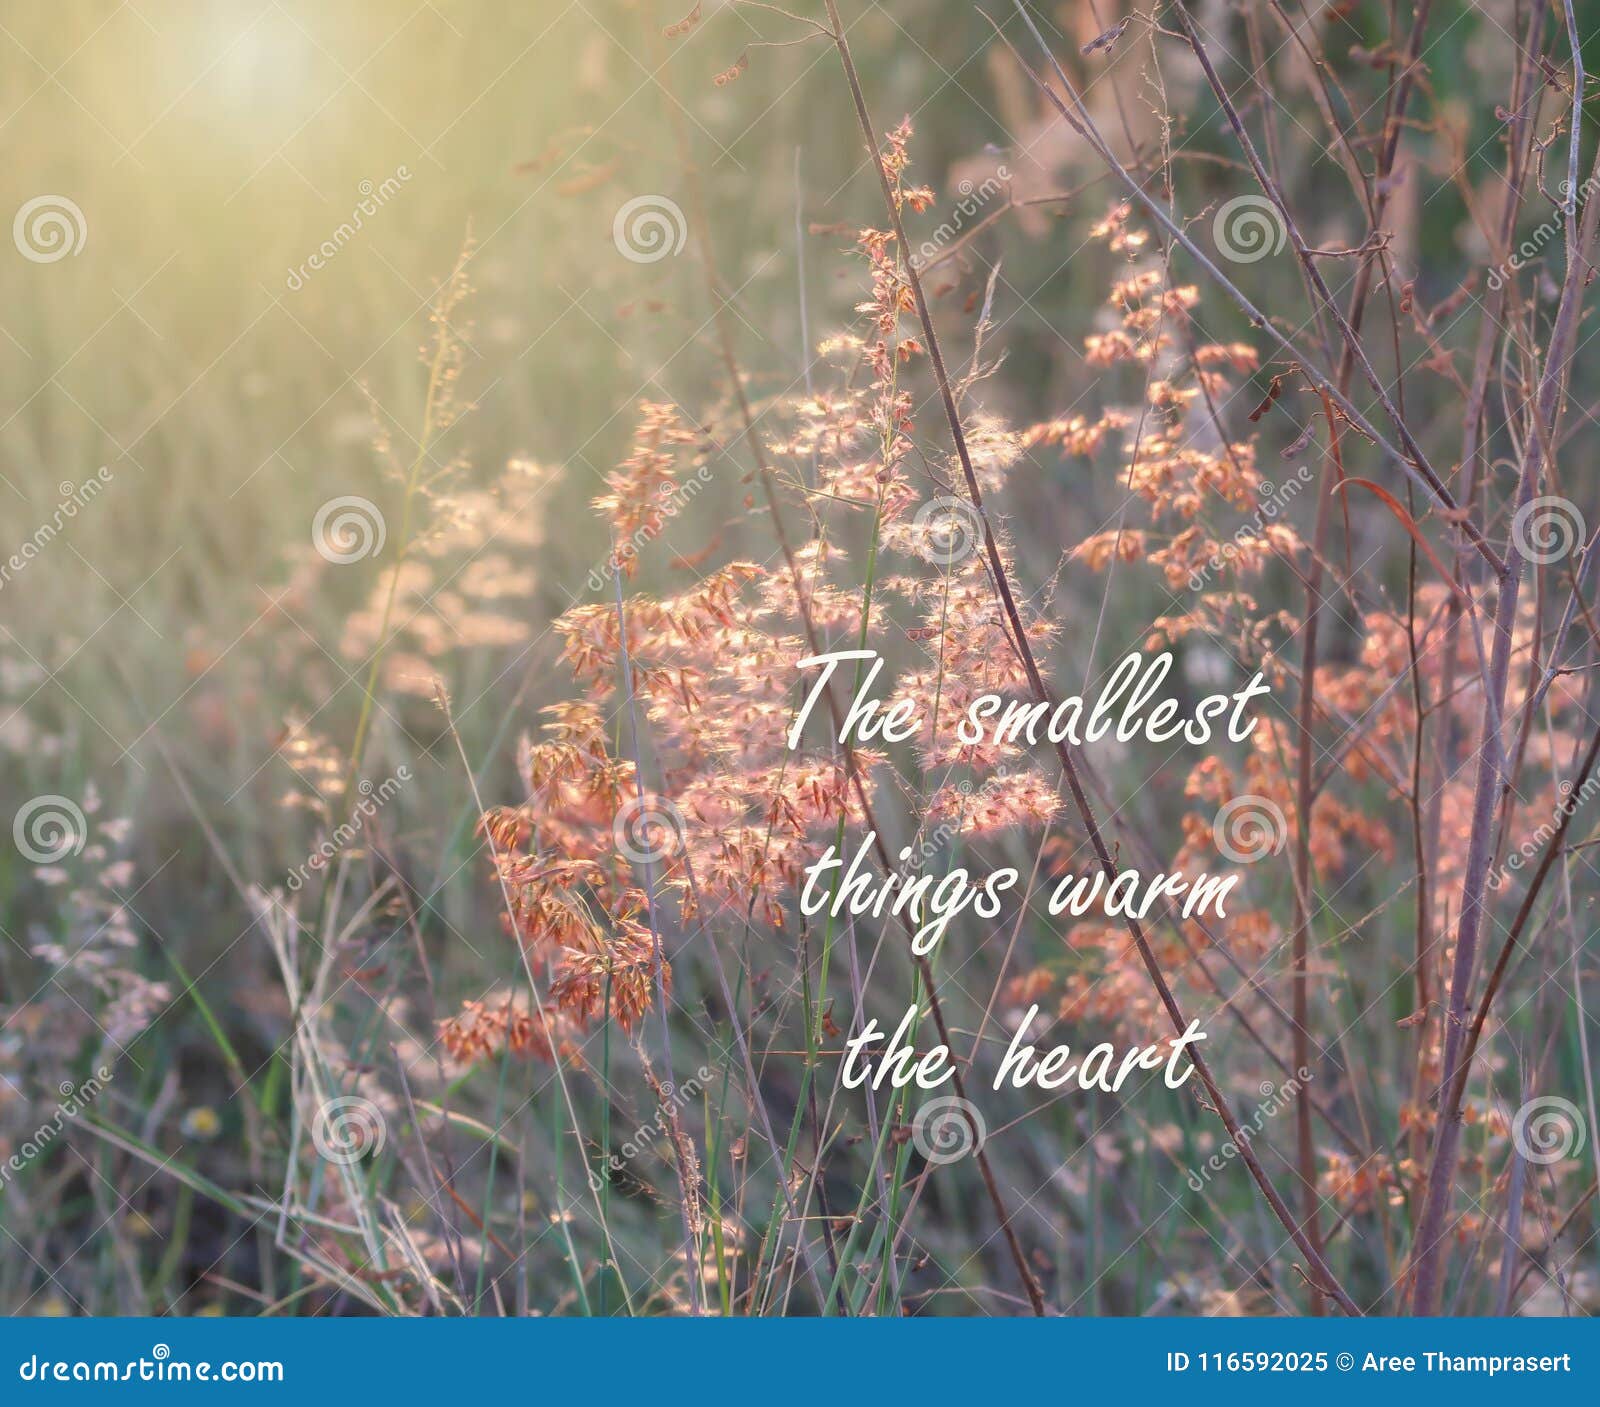 Inspirational and Motivation Quote on Blurred Grass Flower ...